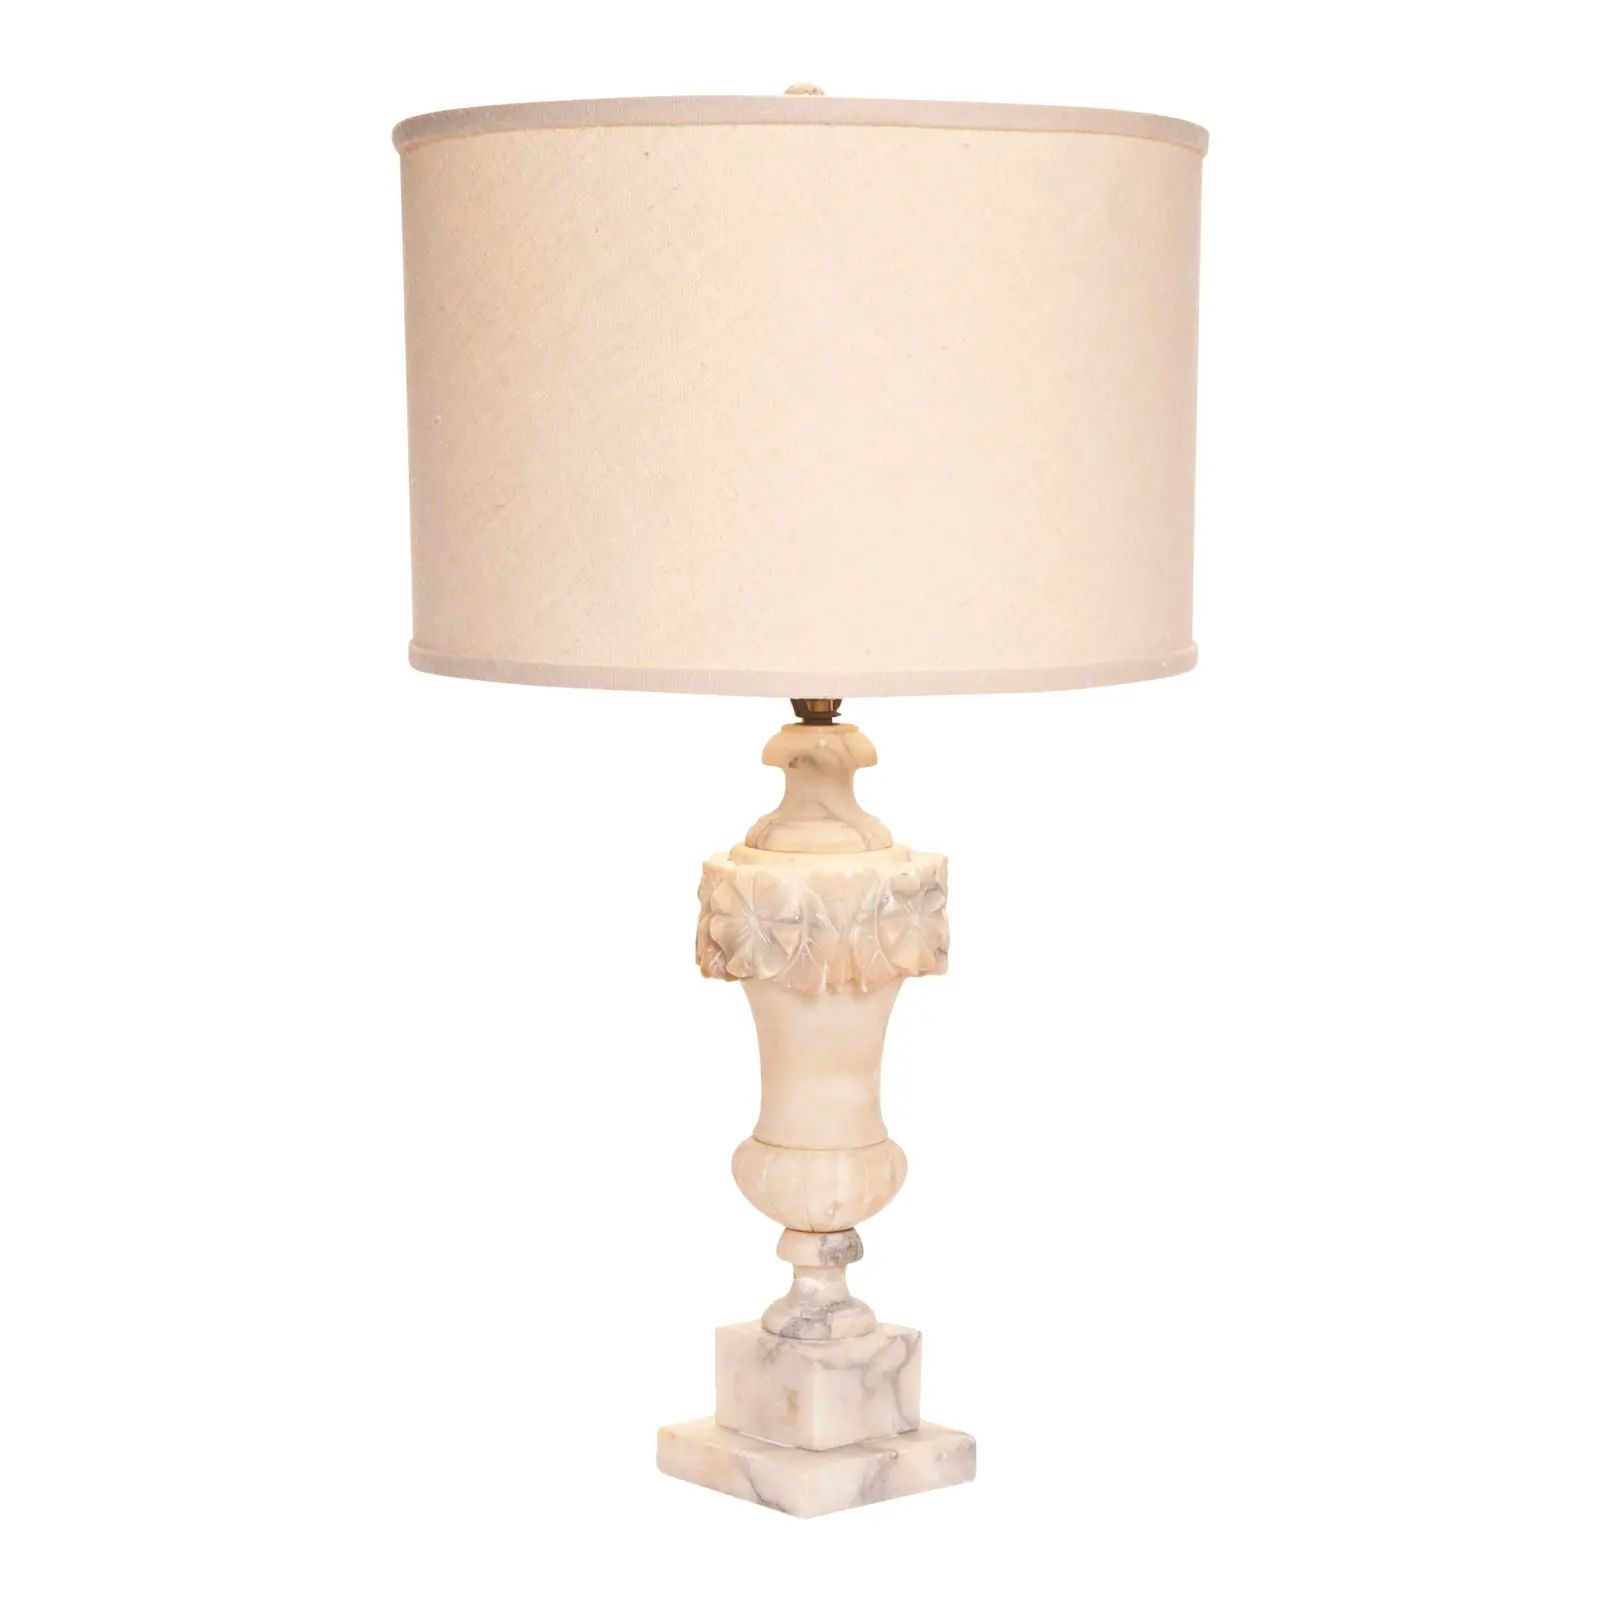 Early 20th Century Alabaster Lamp with Linen Shade | Chairish